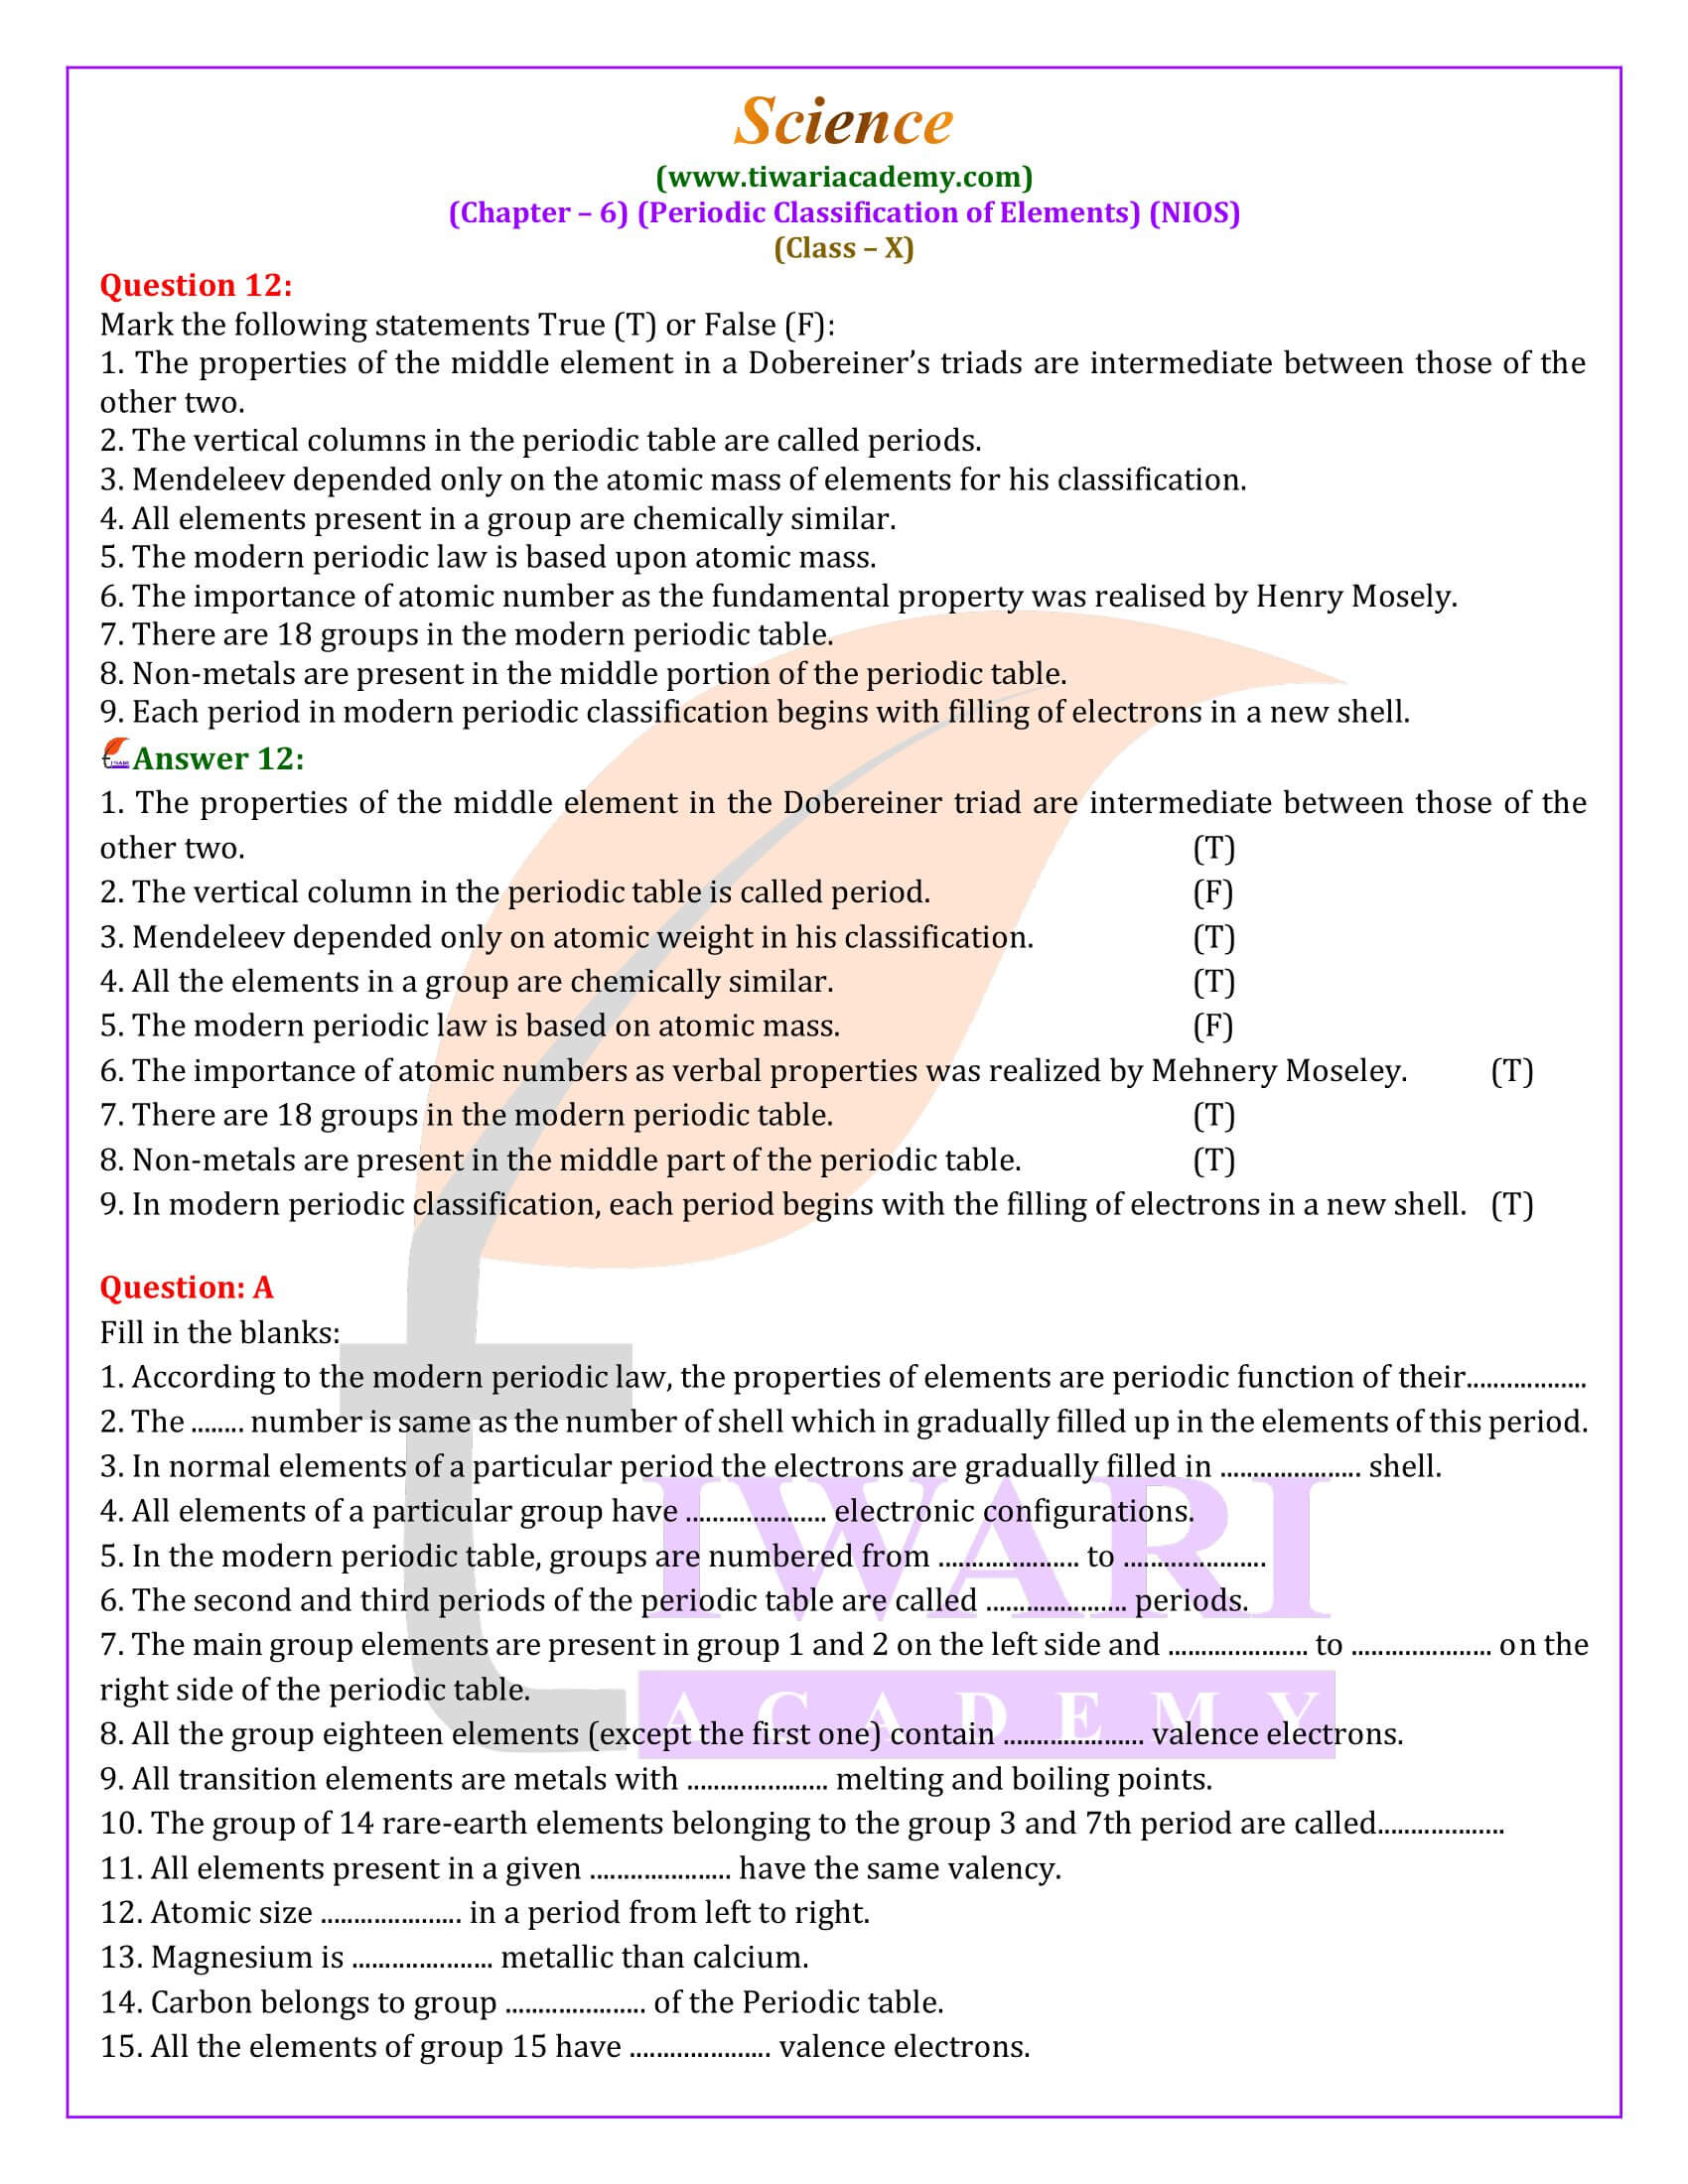 NIOS Class 10 Science Chapter 6 Question Answers